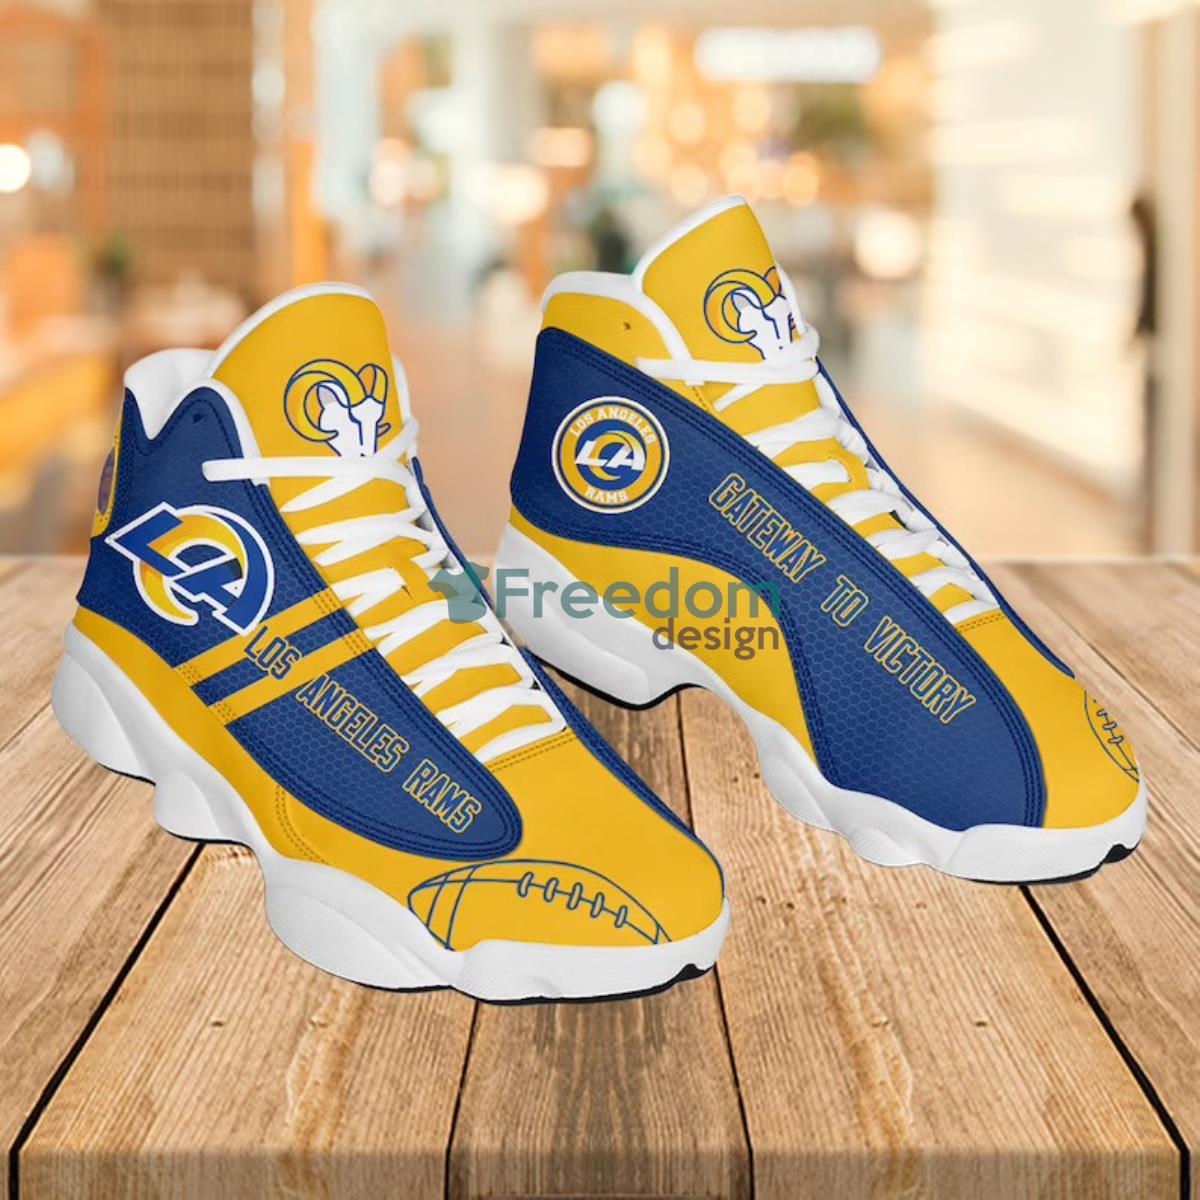 Official Los Angeles Rams Shoes, Rams Shoes, Rams Sneakers